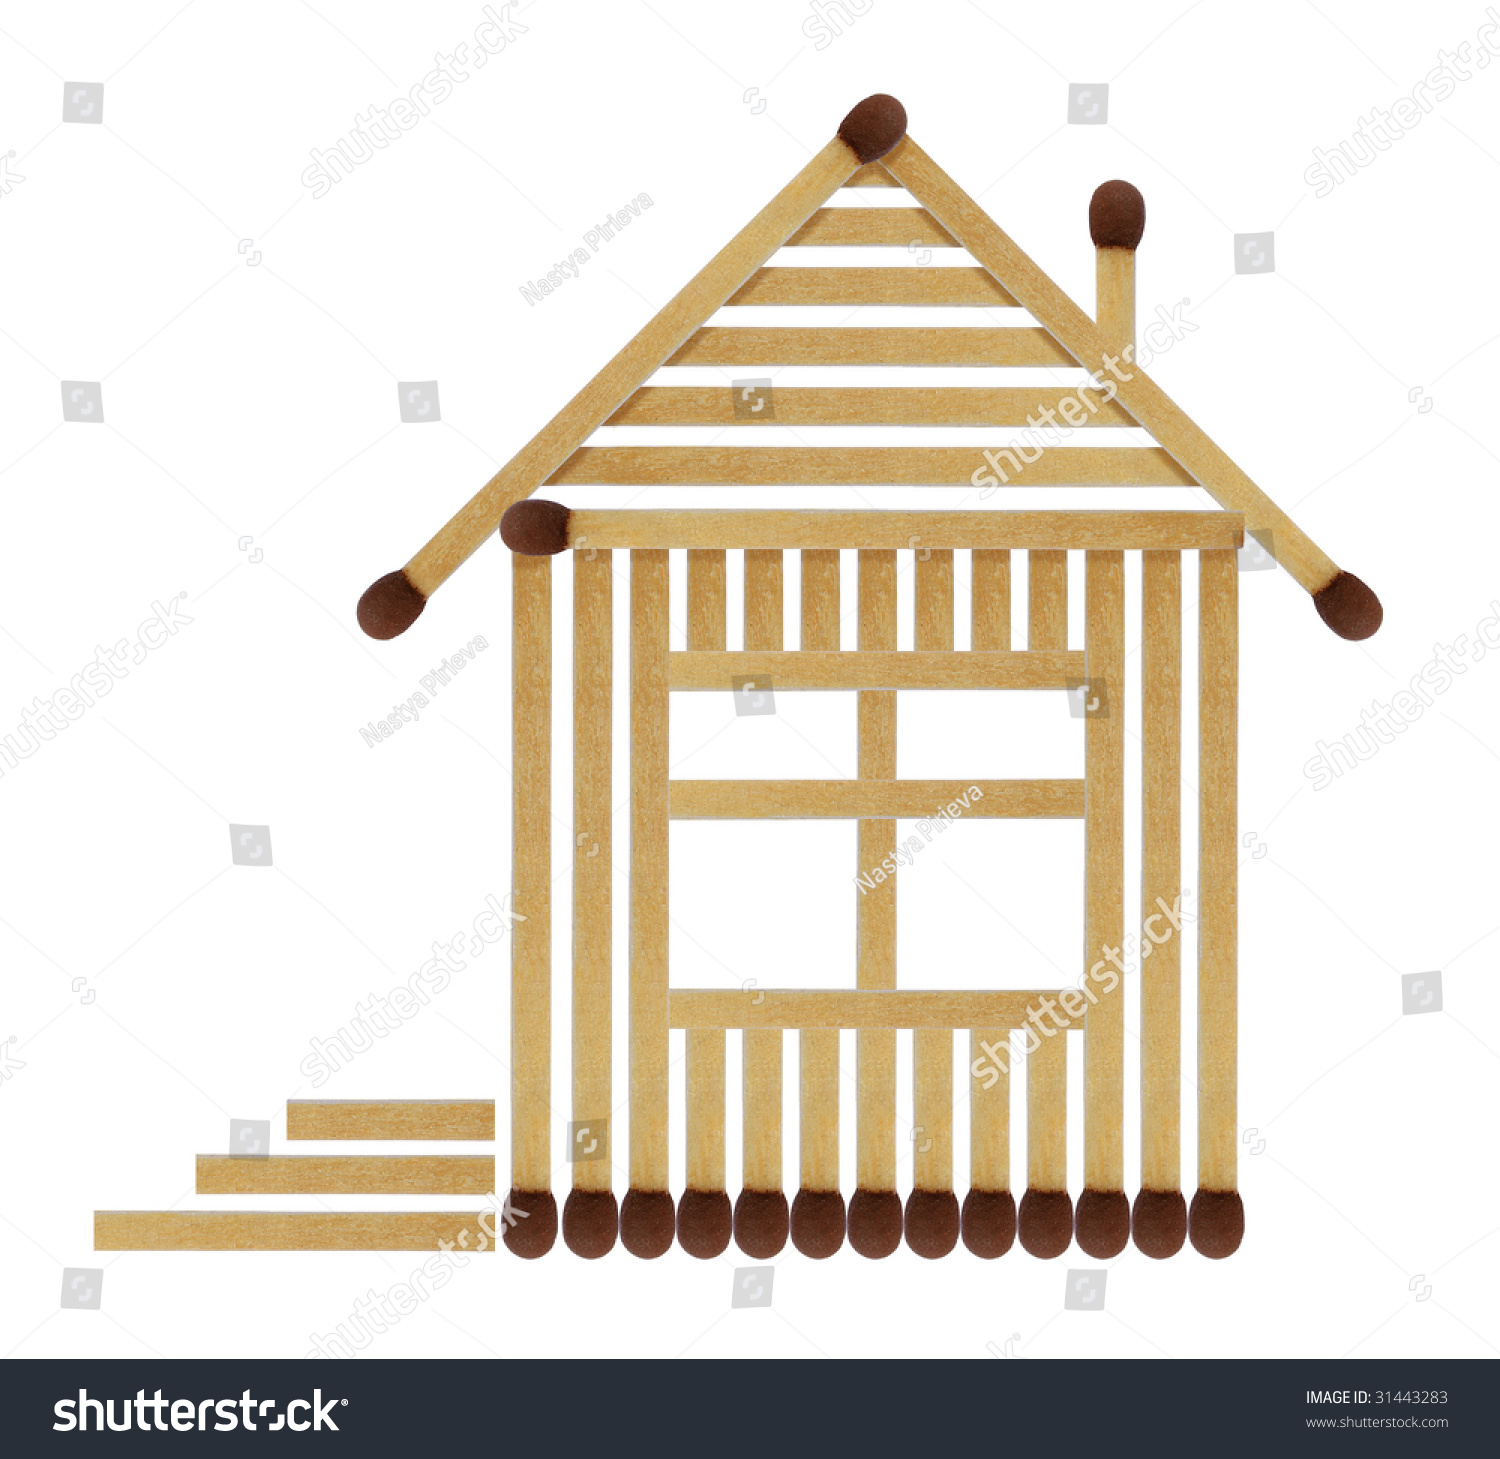 House Matches Stock Photo (Royalty Free) 31443283 - Shutterstock